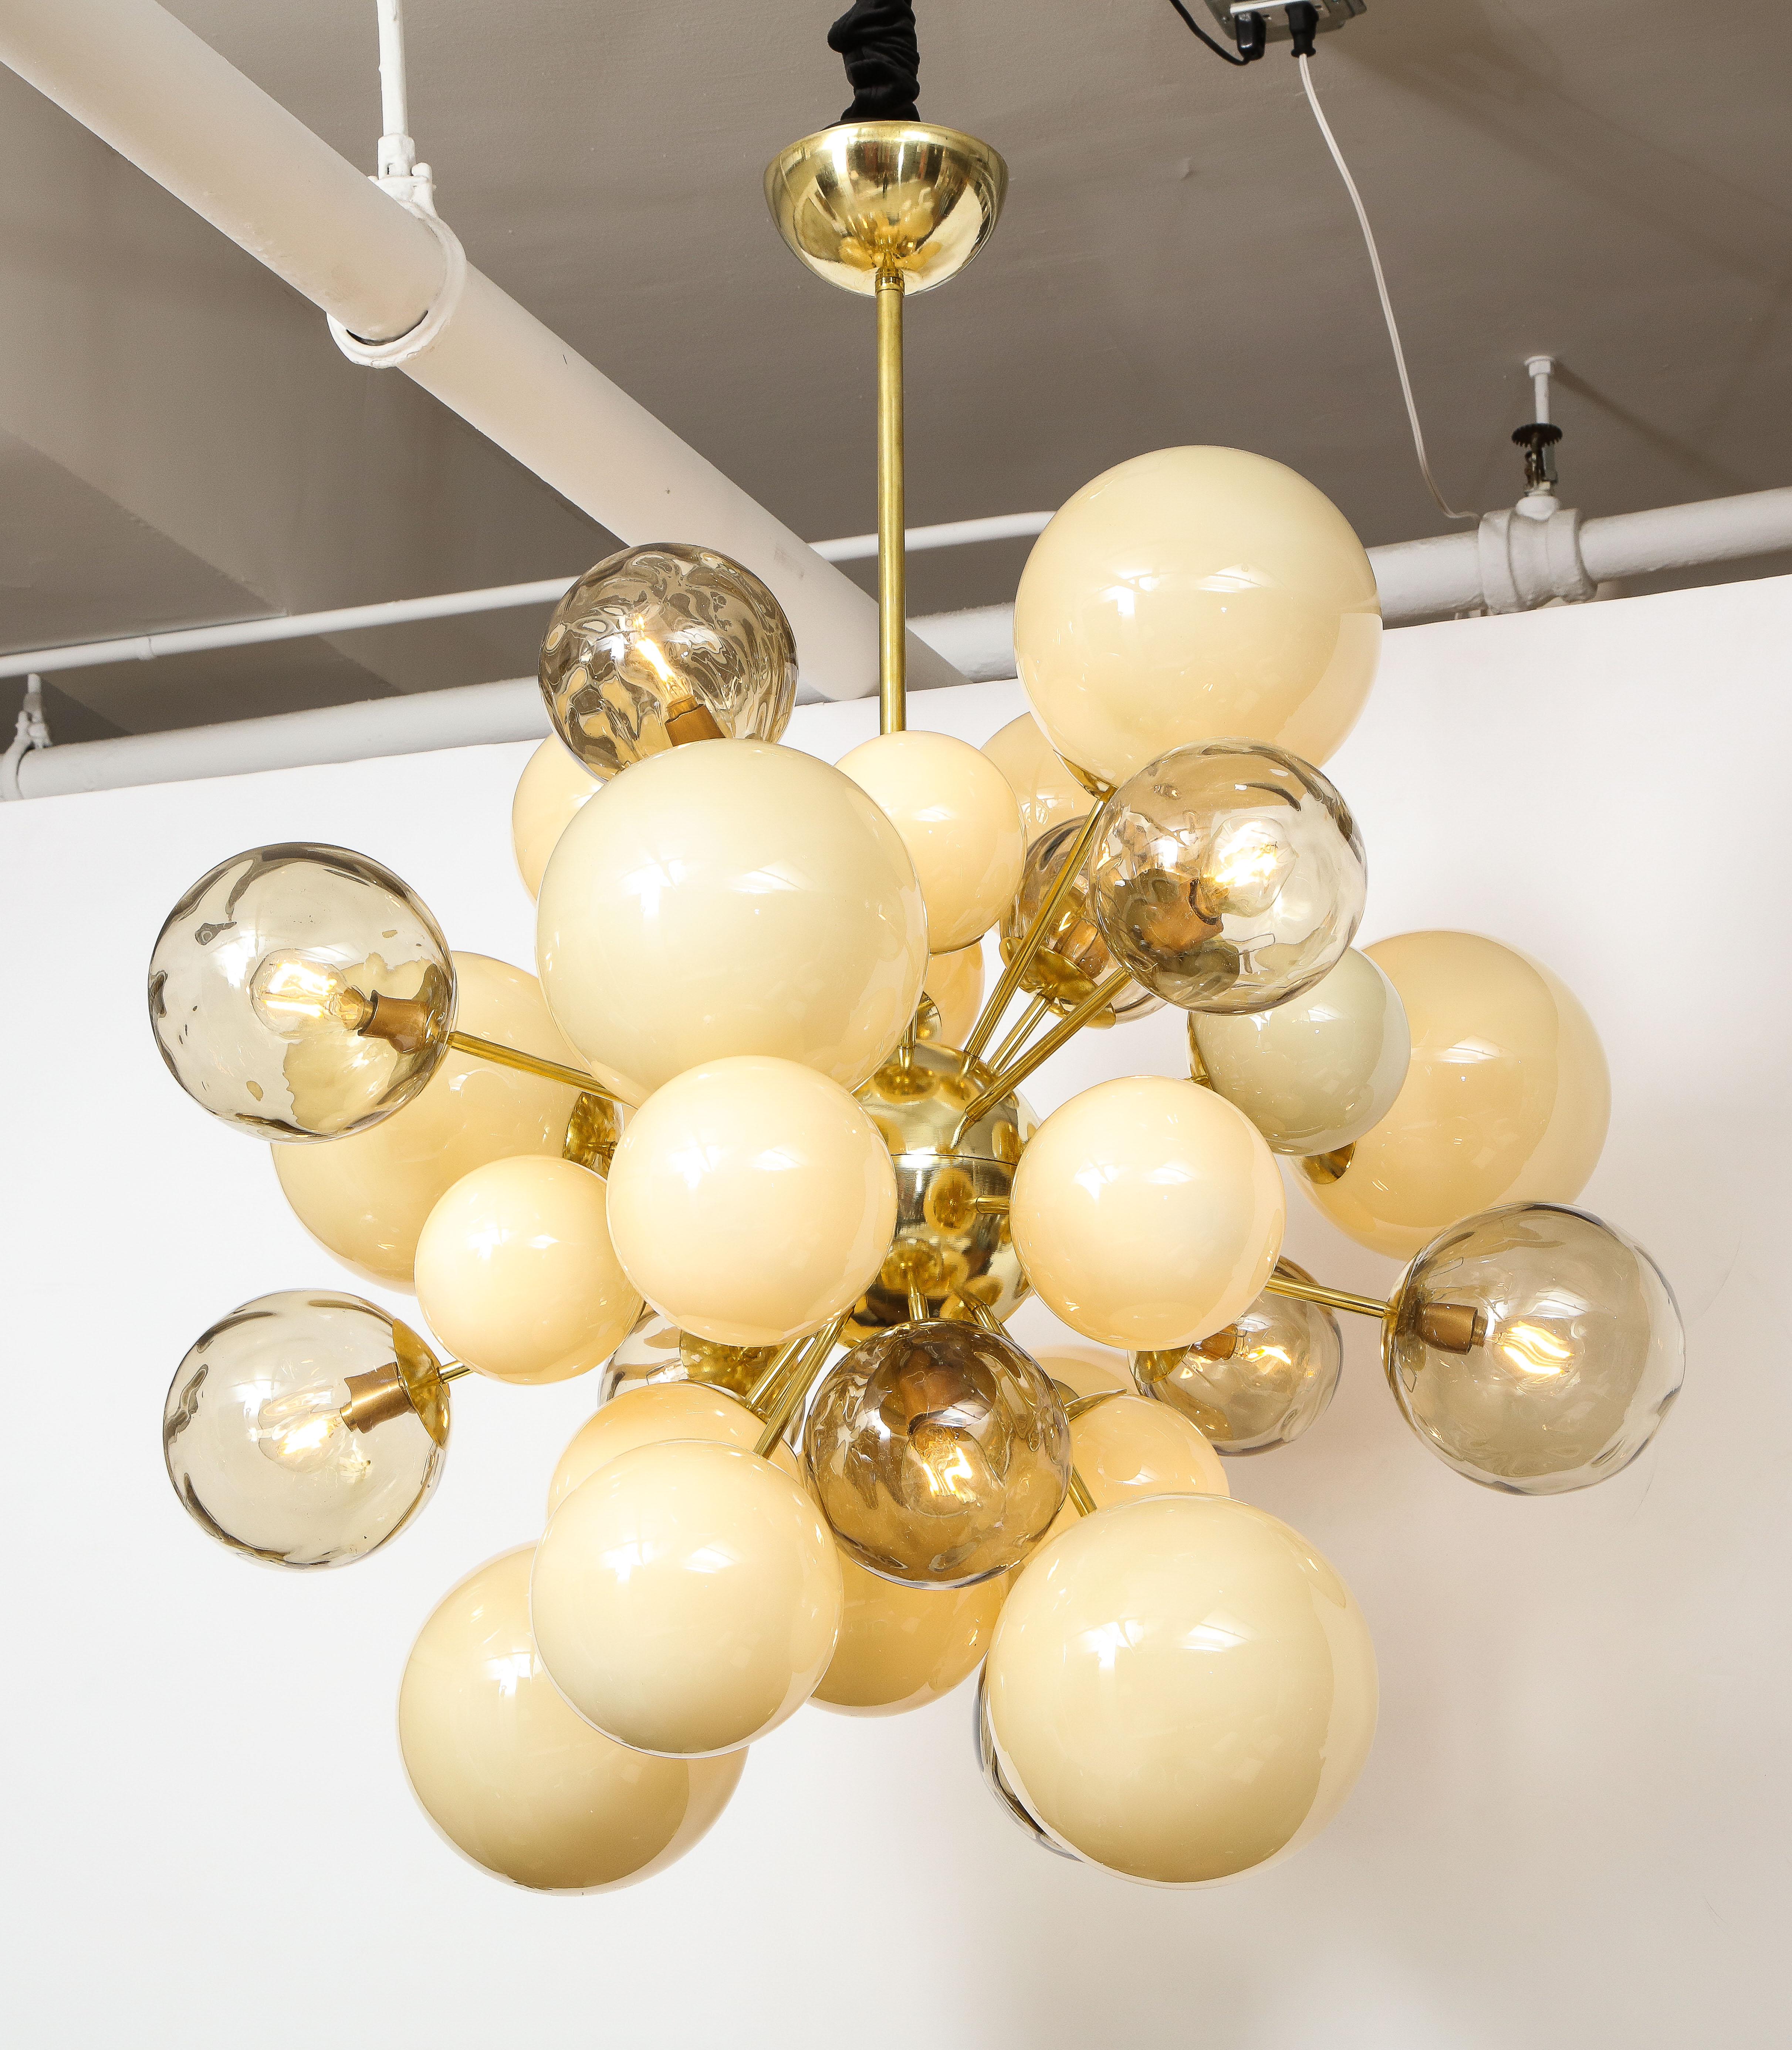 Unique sputnik or starburst chandelier consisting of hand blown, ivory and smoked taupe murano glass globes or spheres of various sizes in both clear and opaque glass finish. Each glass globe is connected to a brass rod which radiates from a brass